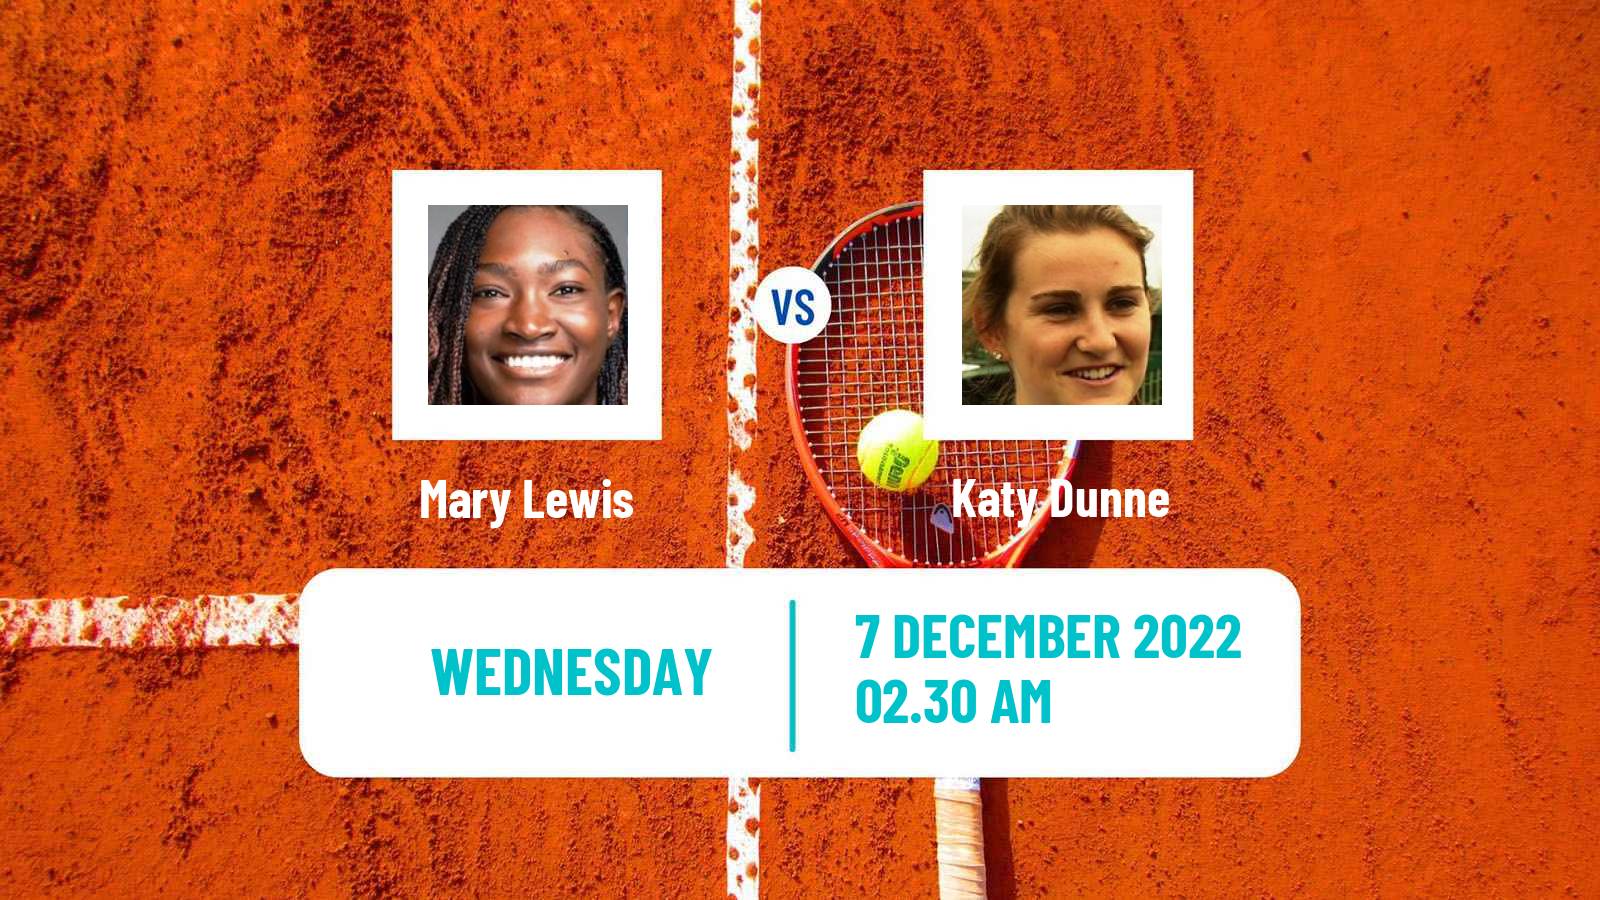 Tennis ITF Tournaments Mary Lewis - Katy Dunne